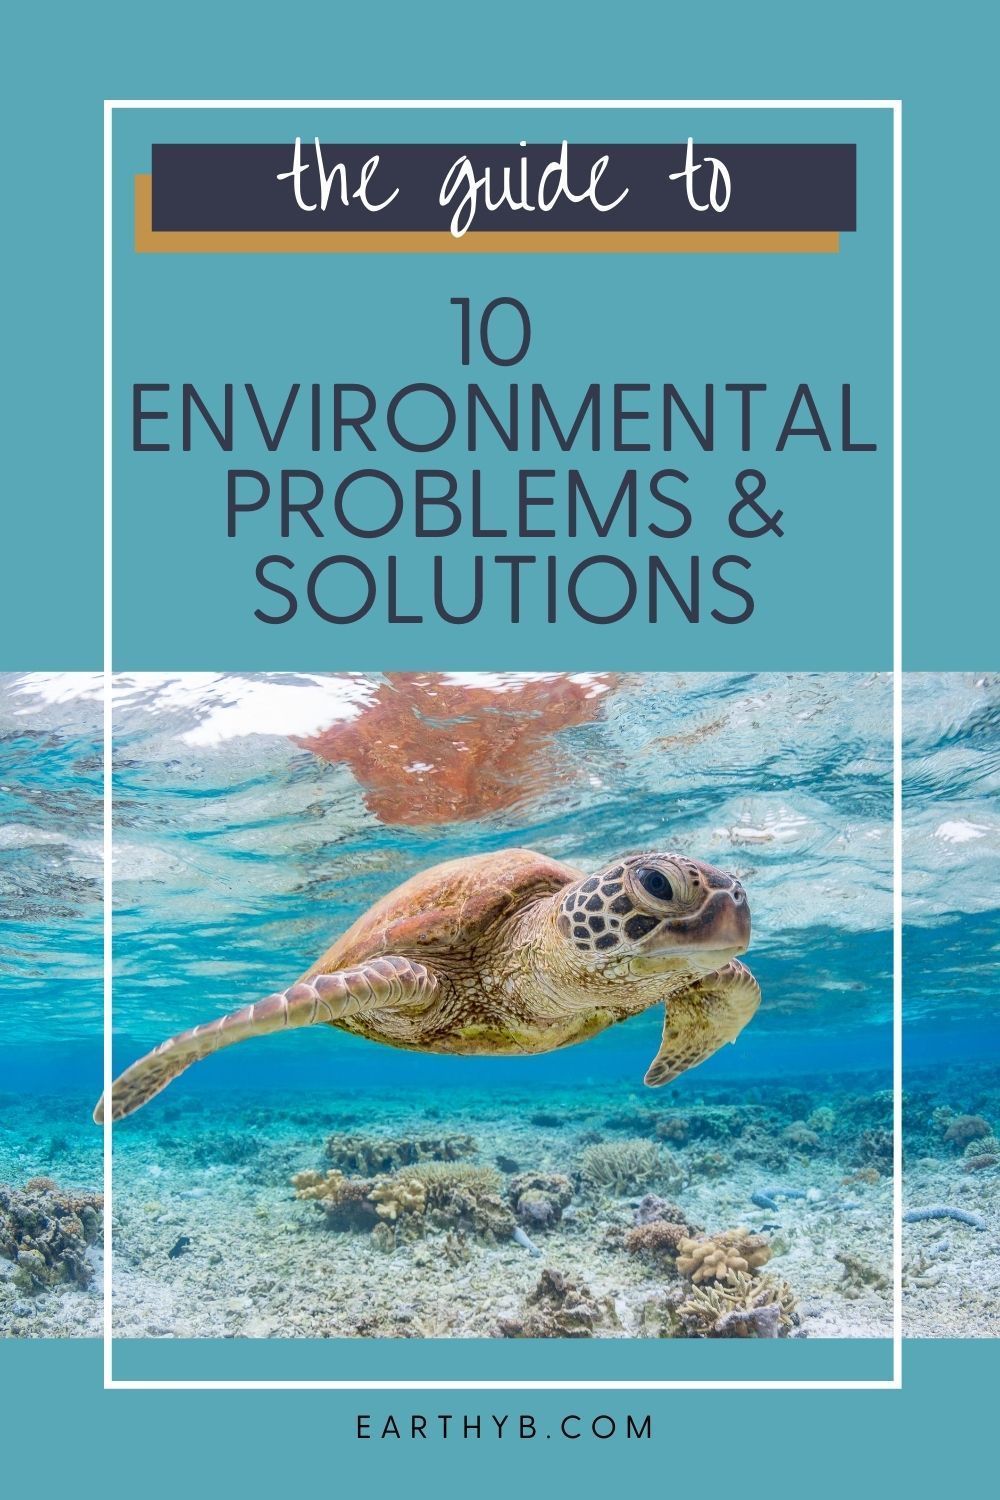 5 steps to solving environmental problems